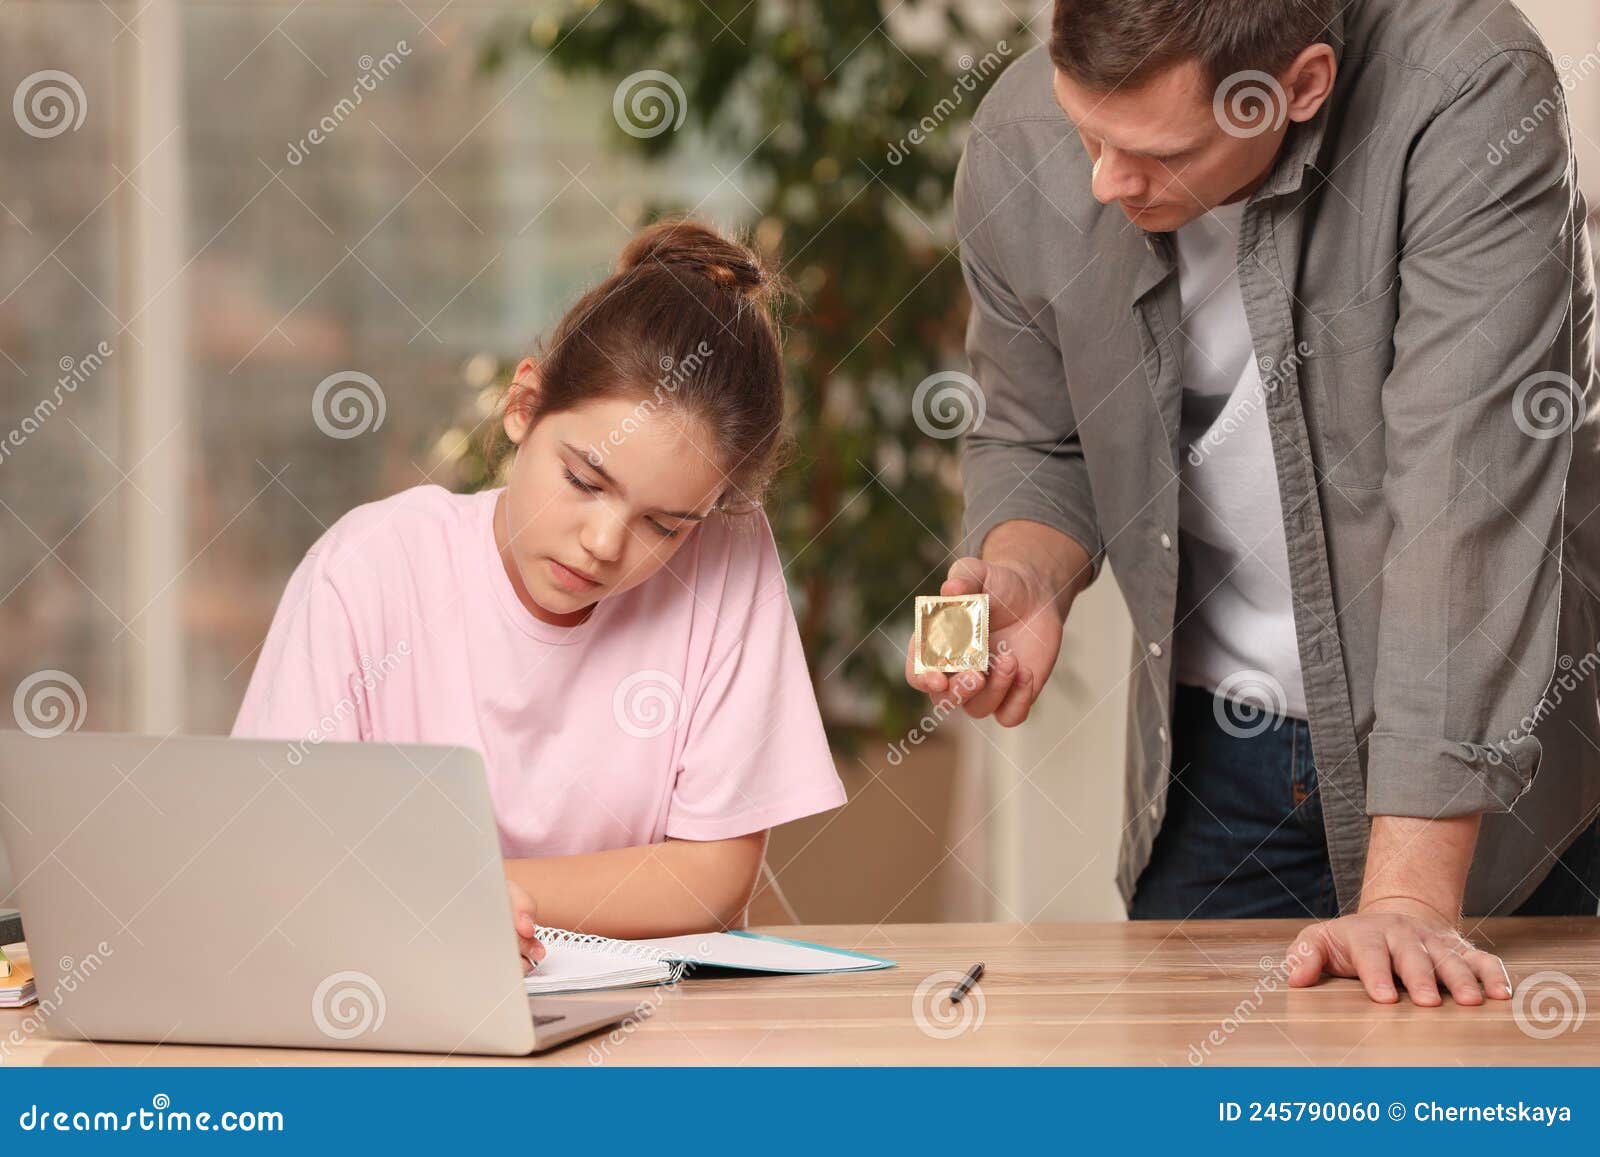 Father Talking with His Teenage Daughter about Contraception while she Using Laptop at Home